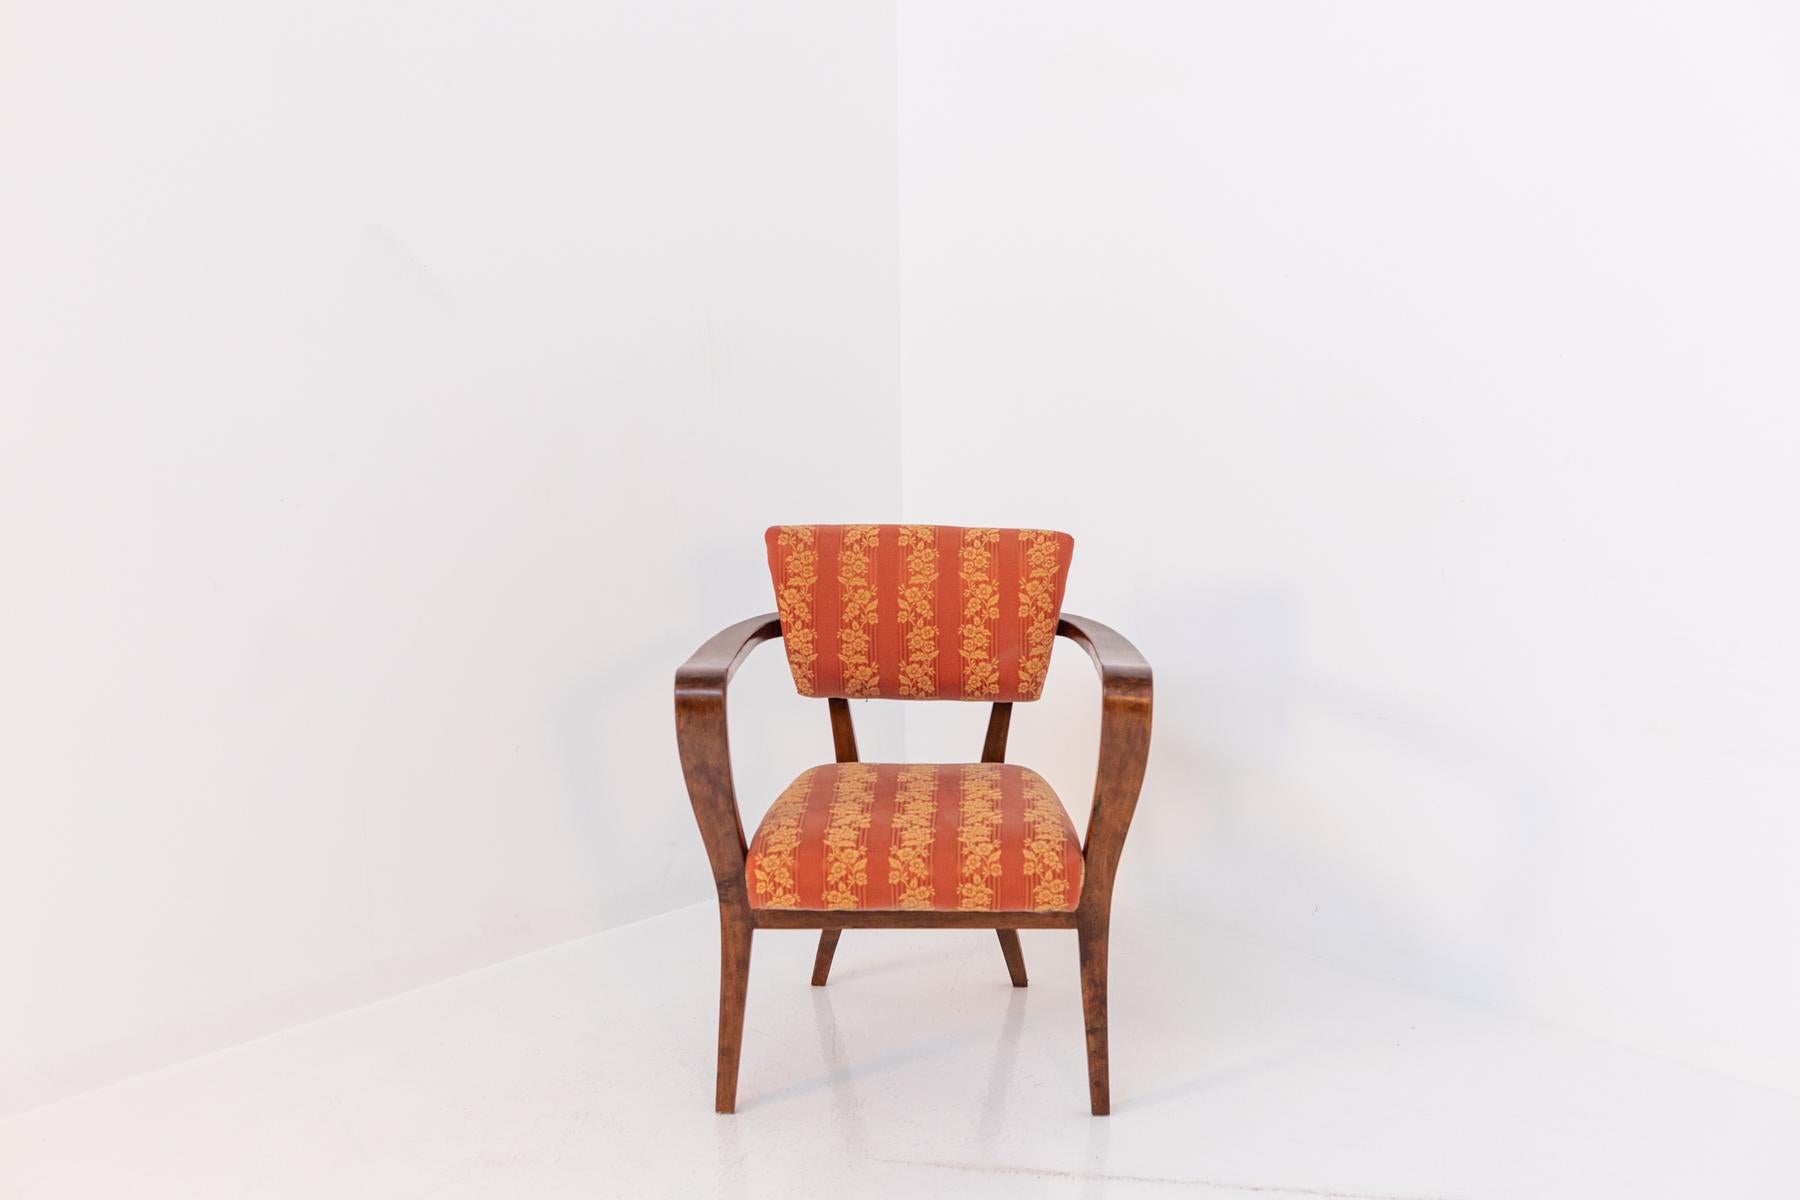 Elegant and harmonious Italian chair designed by Gio Ponti and published in the Rima catalog of the Gastone Rinaldi's study 1950s. The chair frame is made of fine wood, while the seat and back are upholstered and covered in a beautiful orange damask